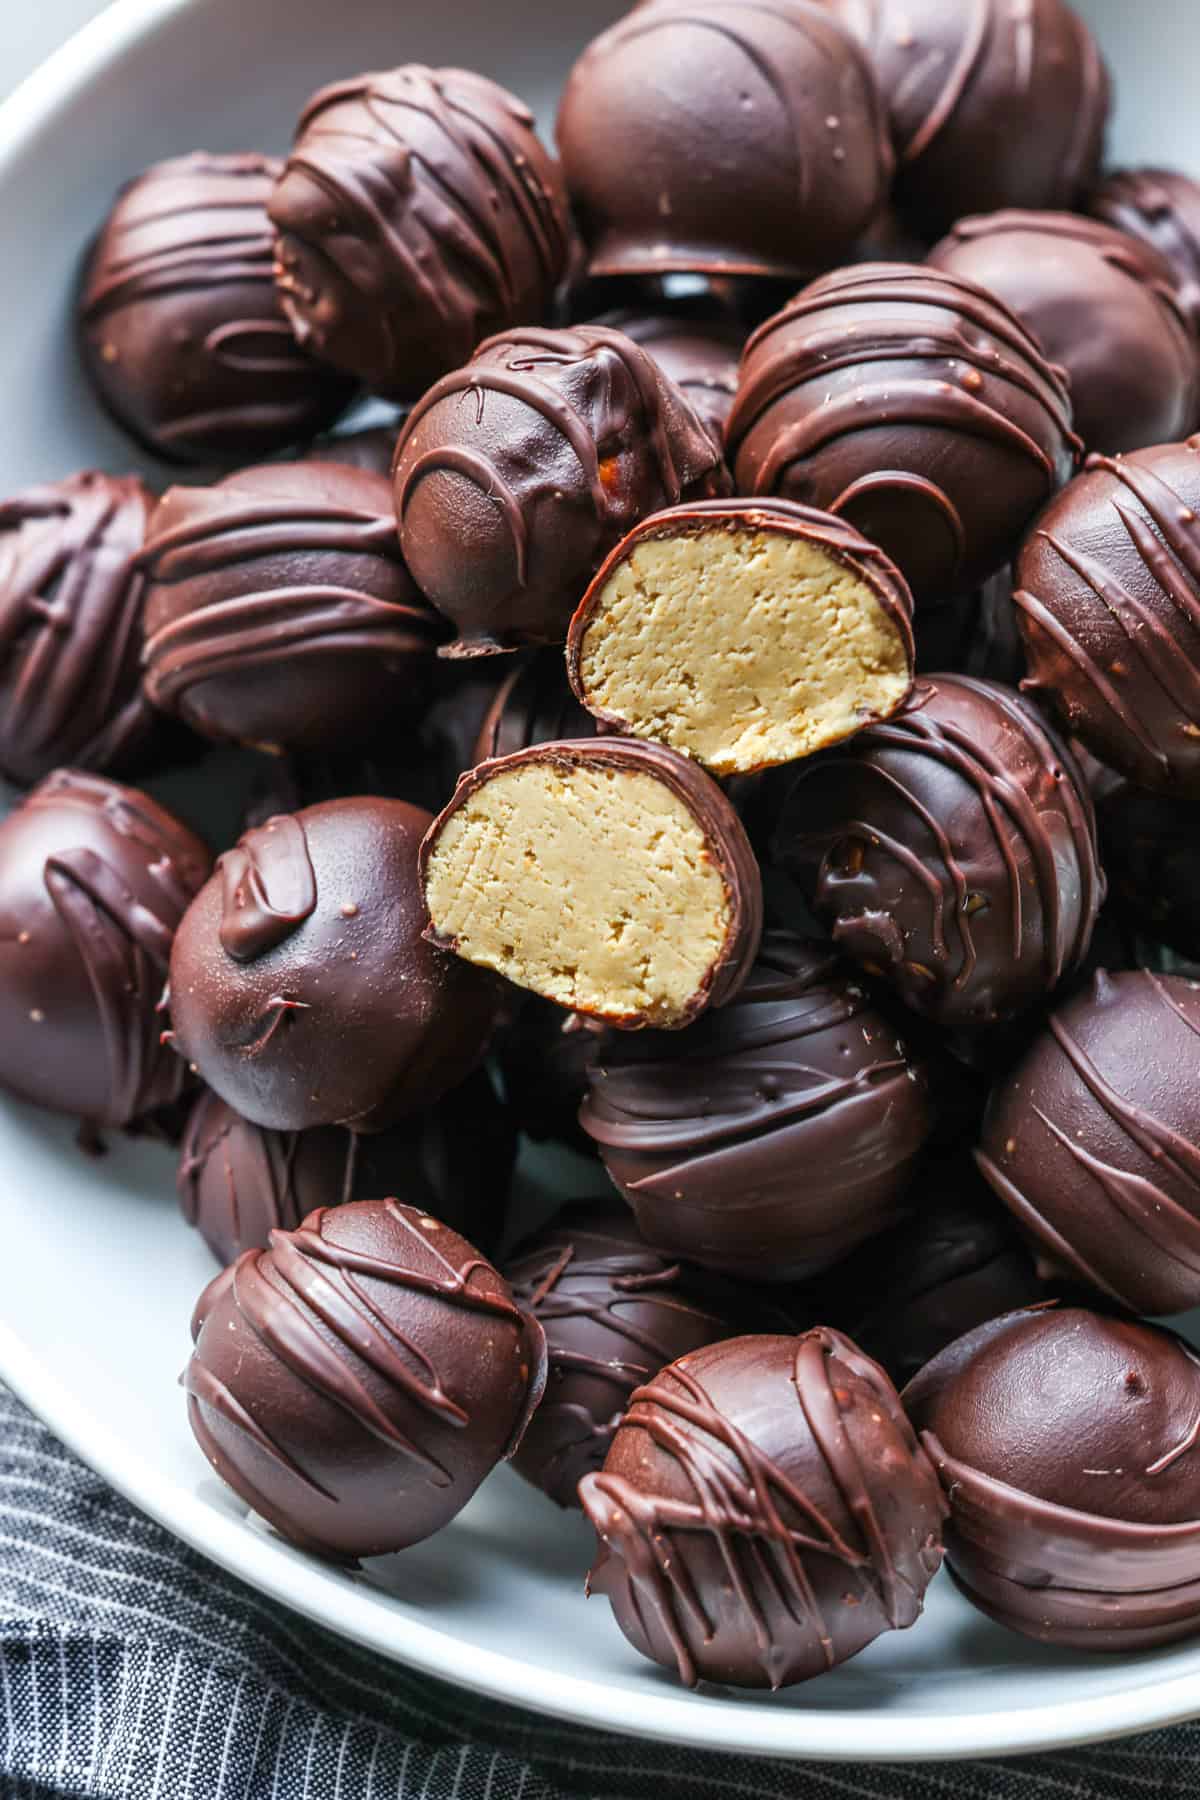 Peanut Butter balls in a white serving bowl with one cut in half showing the inside.